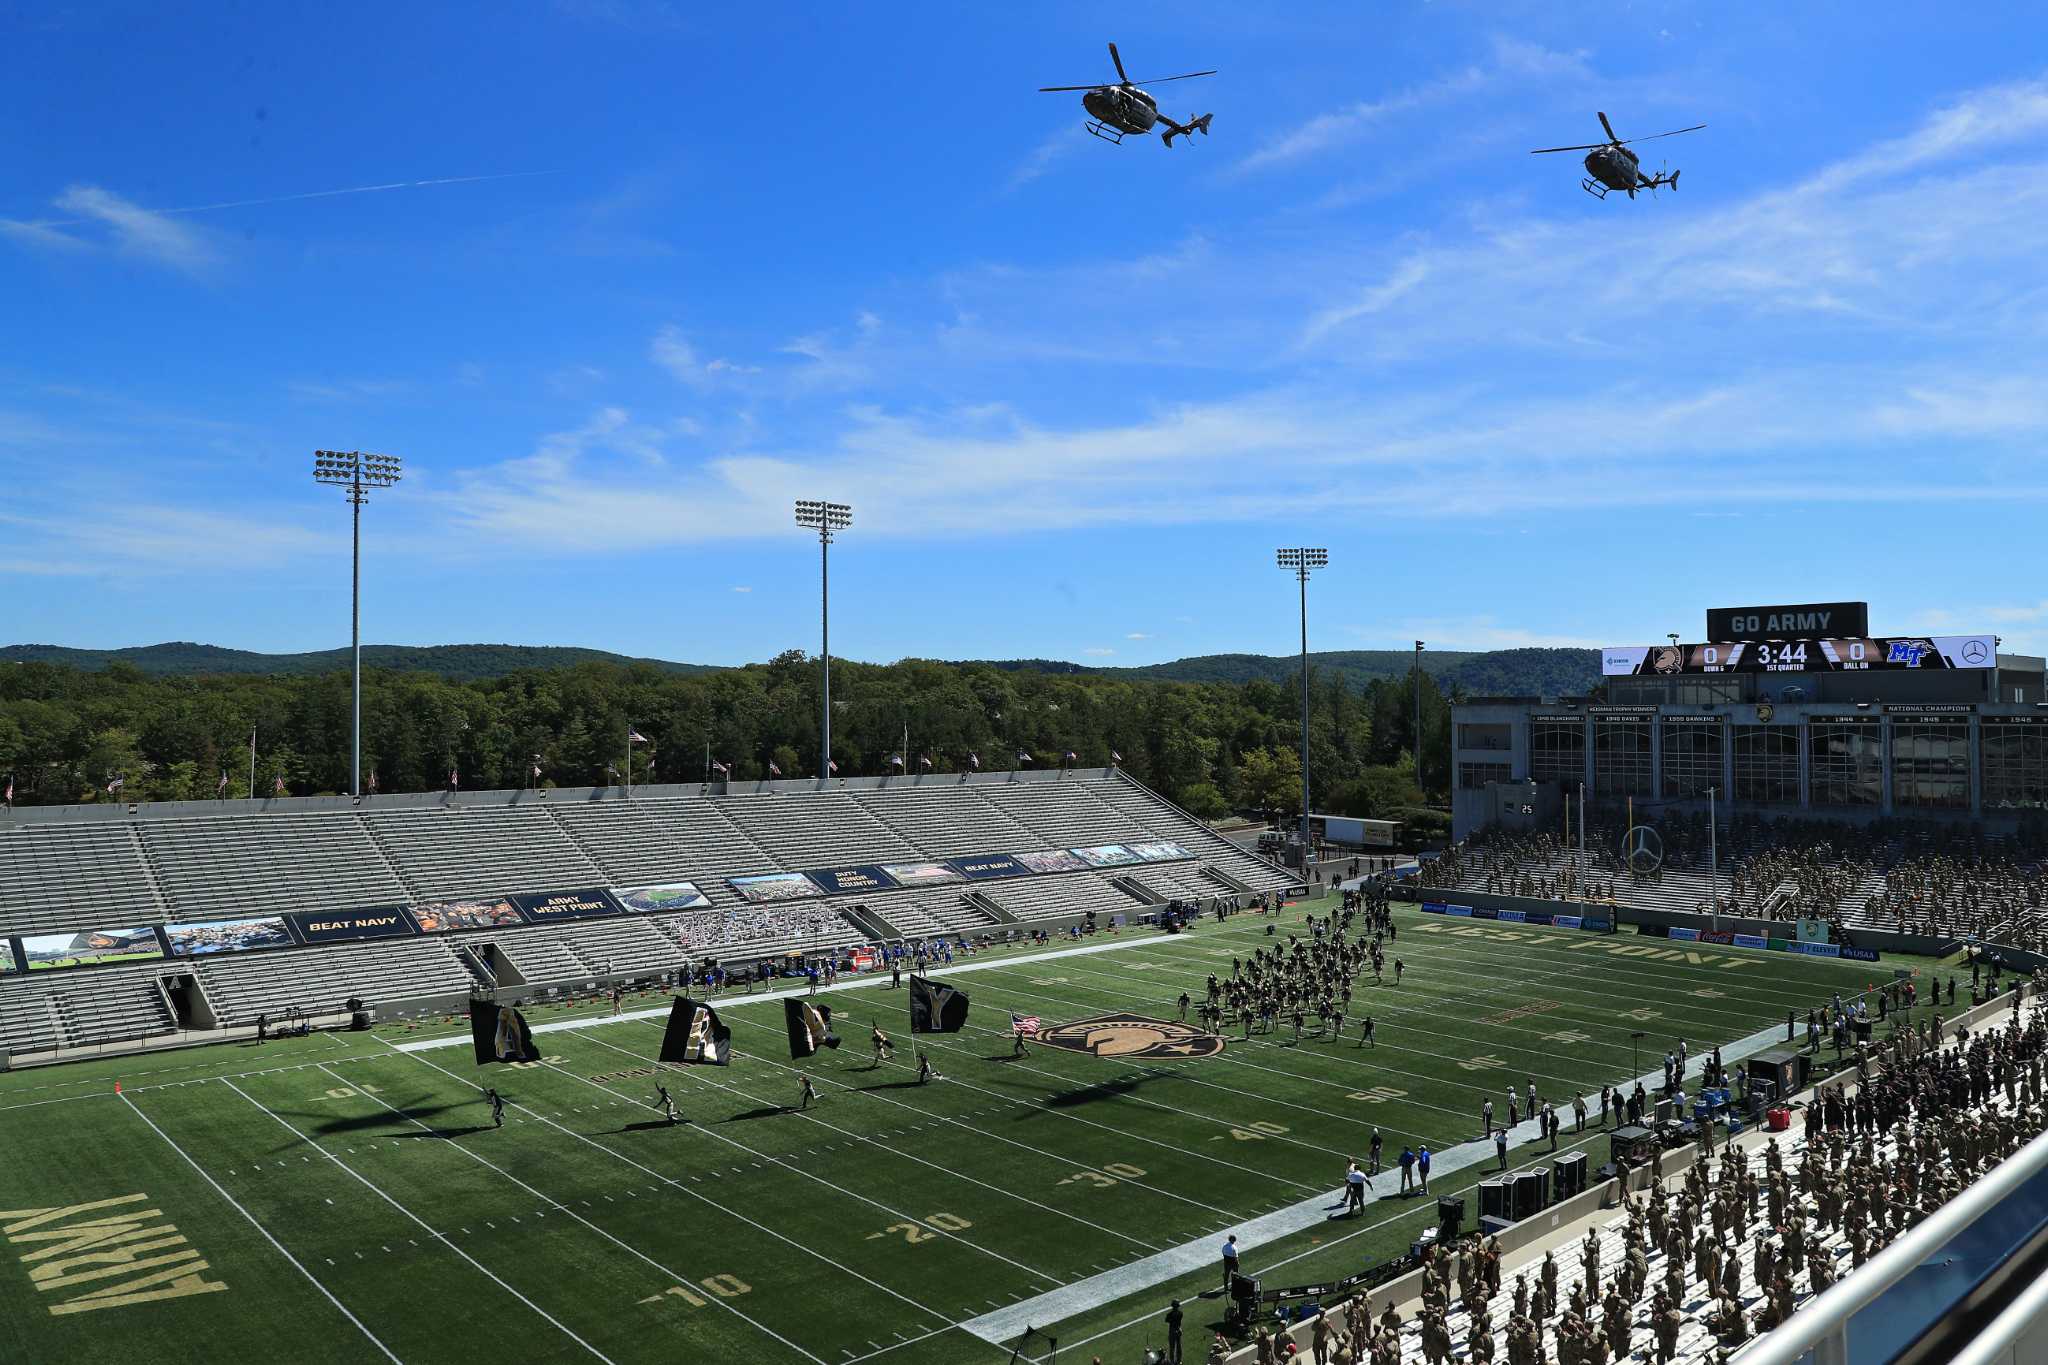 Football - Army West Point